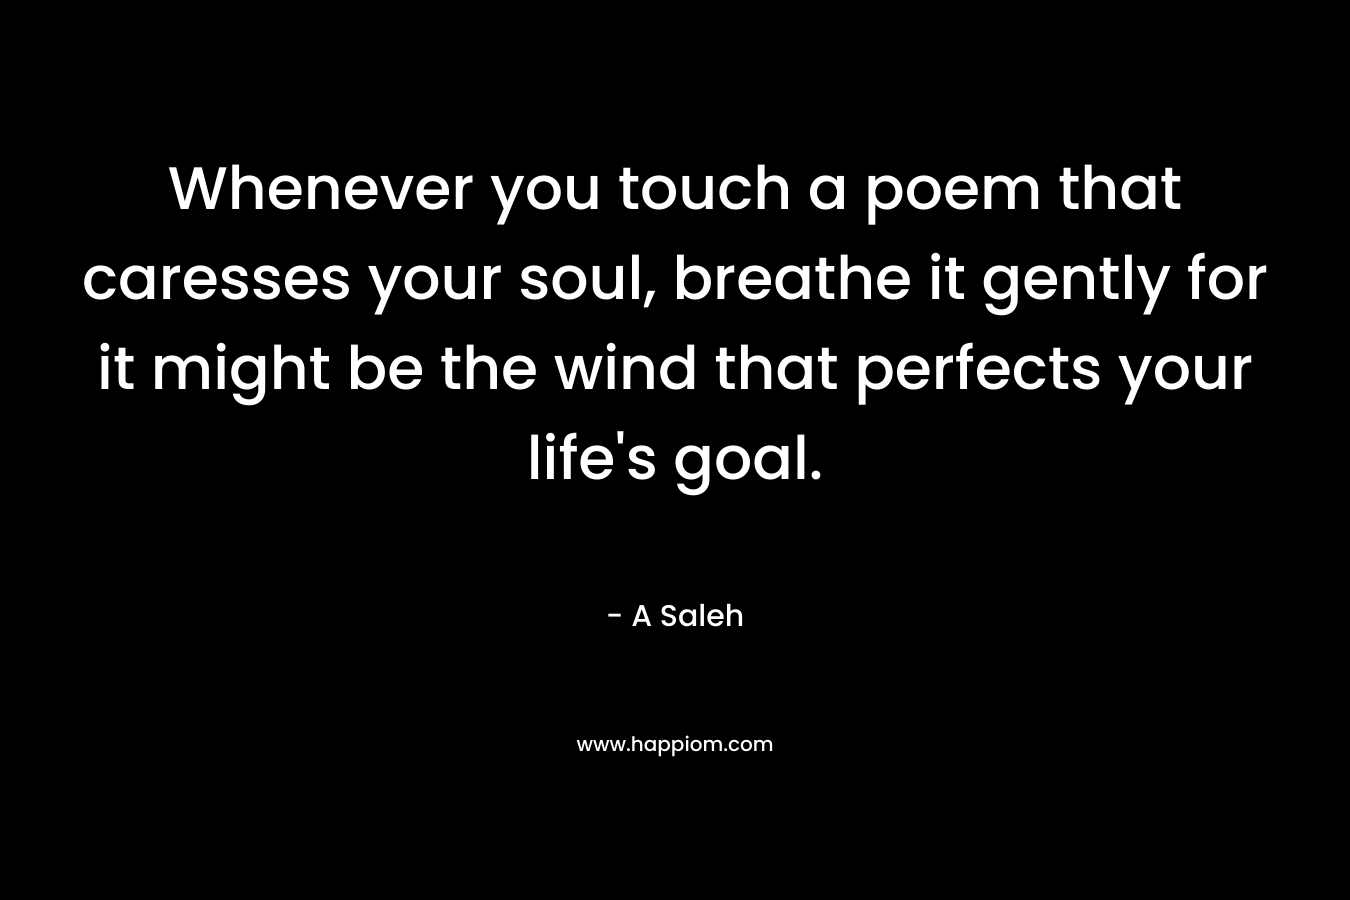 Whenever you touch a poem that caresses your soul, breathe it gently for it might be the wind that perfects your life’s goal. – A Saleh